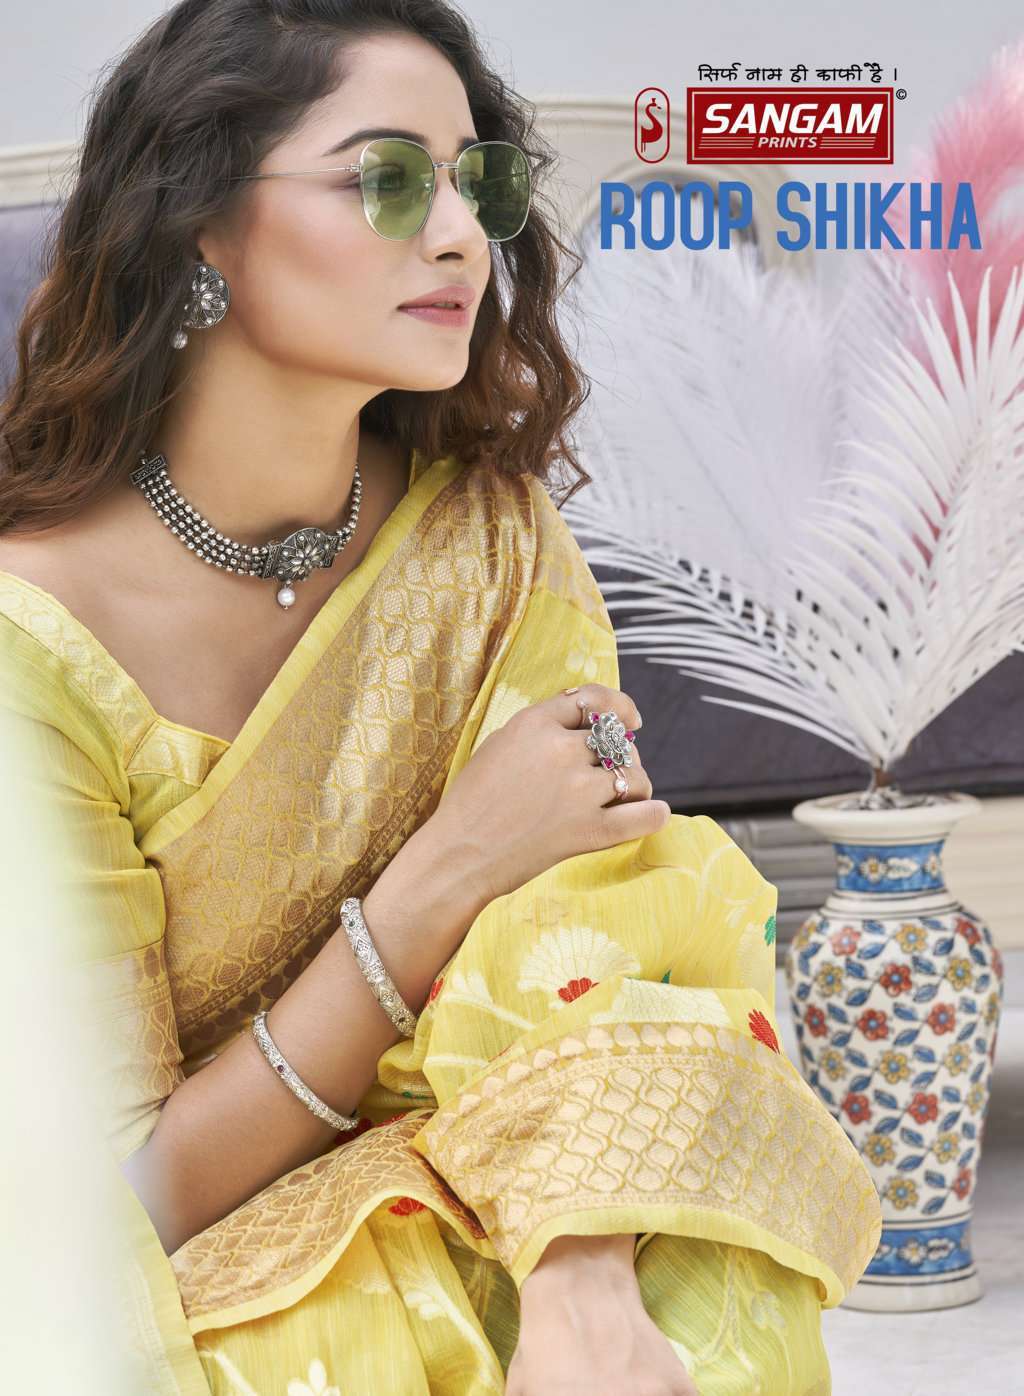 Sangam Print Roop Shikha Cotton With Fancy Saree Collection